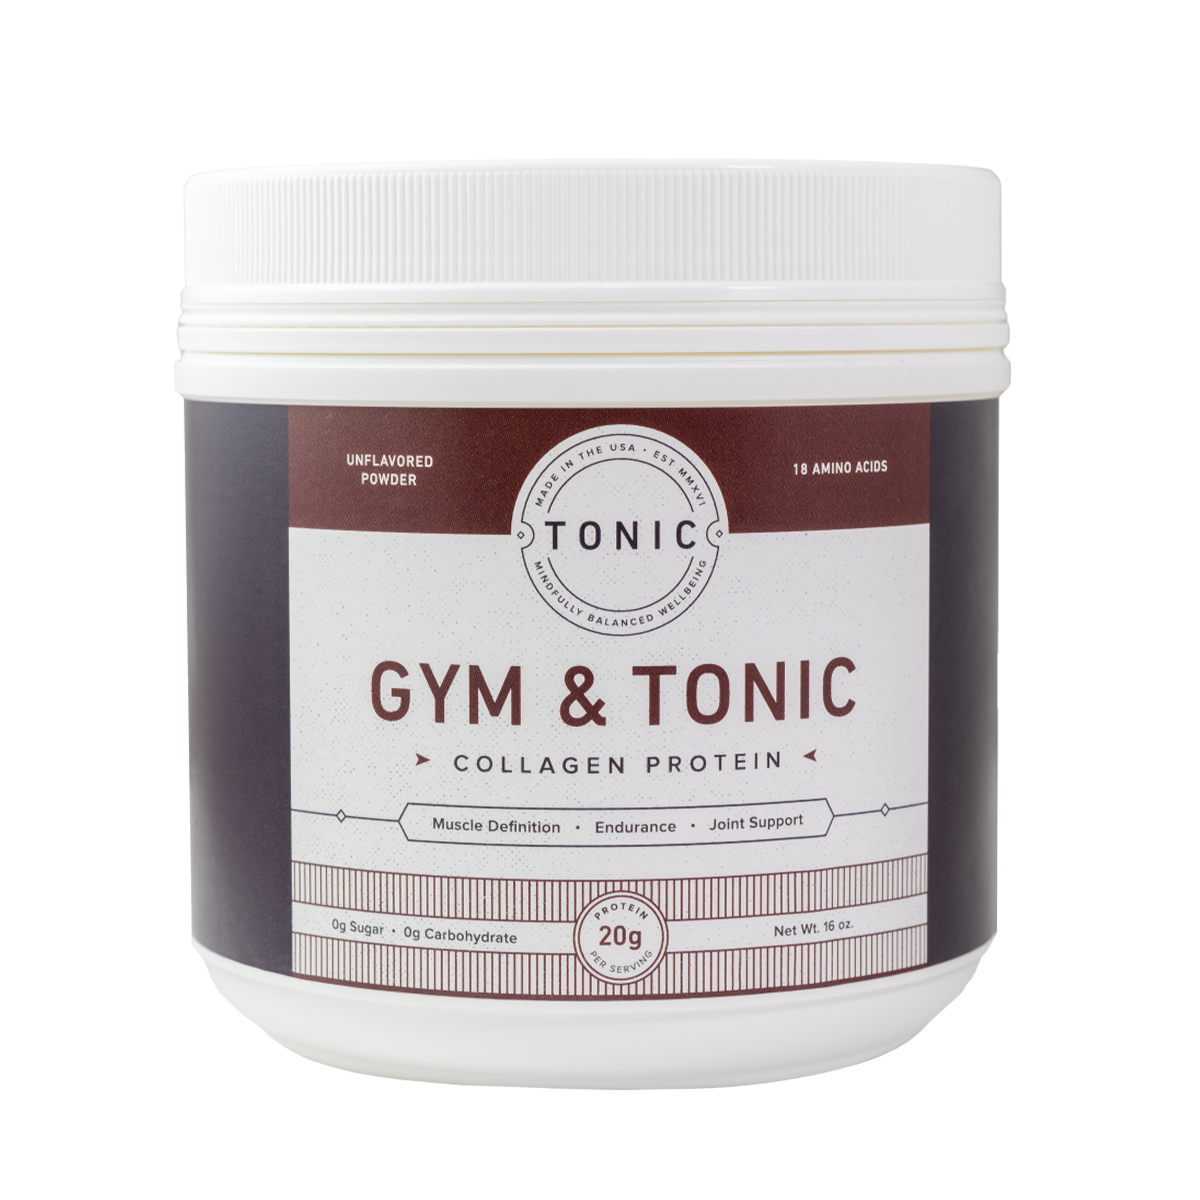 Gym &amp; Tonic Collagen Protein by Tonic